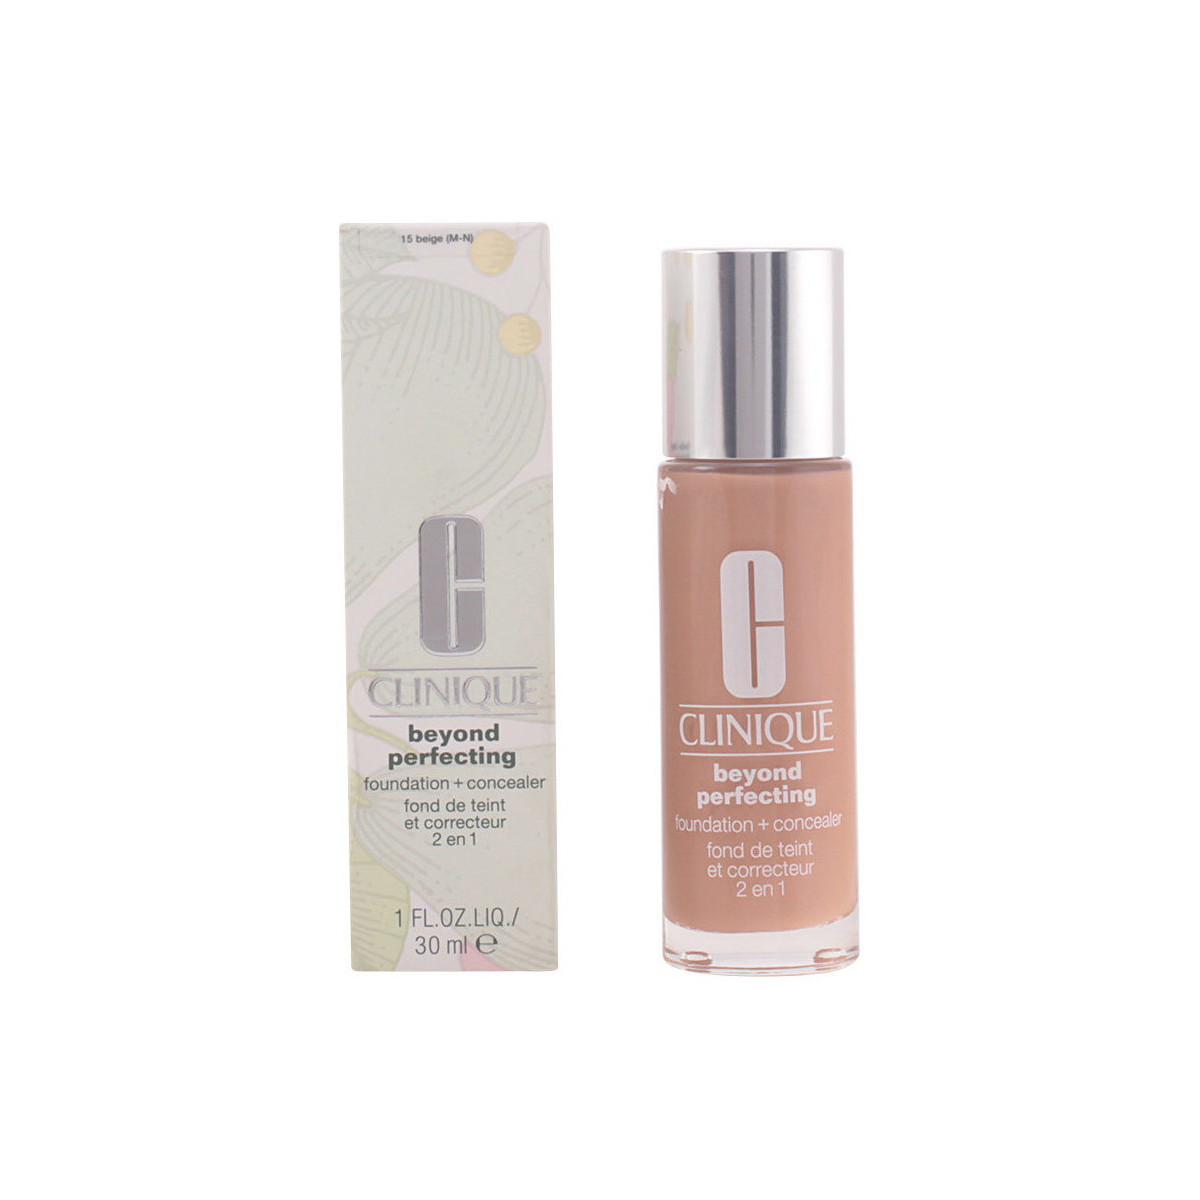 Beauty Make-up & Foundation  Clinique Beyond Perfecting Foundation + Concealer 15-beige 